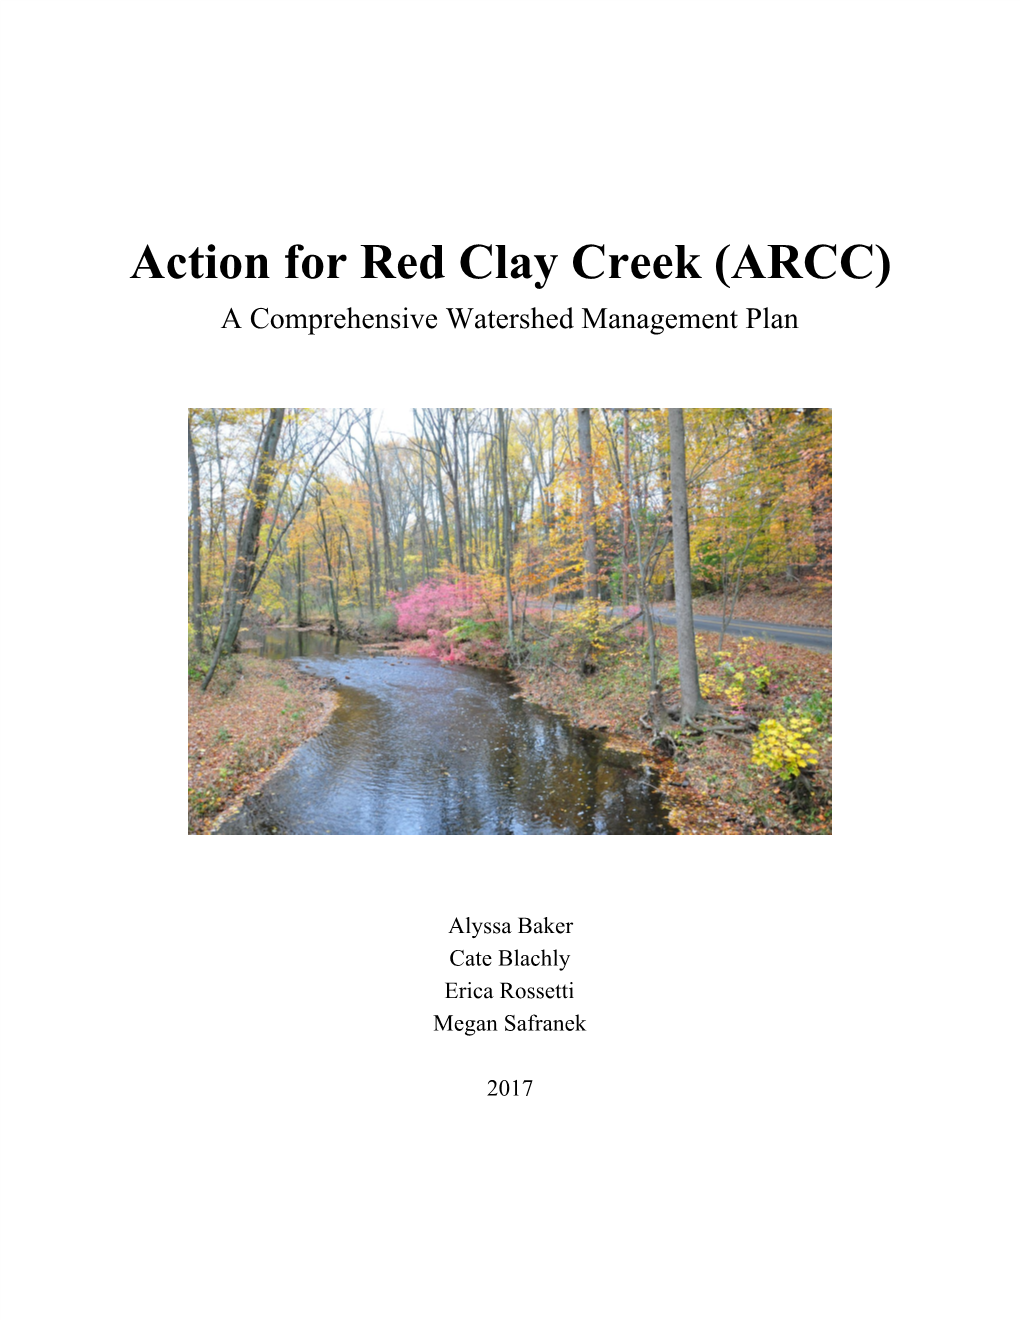 Action for Red Clay Creek (ARCC) a Comprehensive Watershed Management Plan